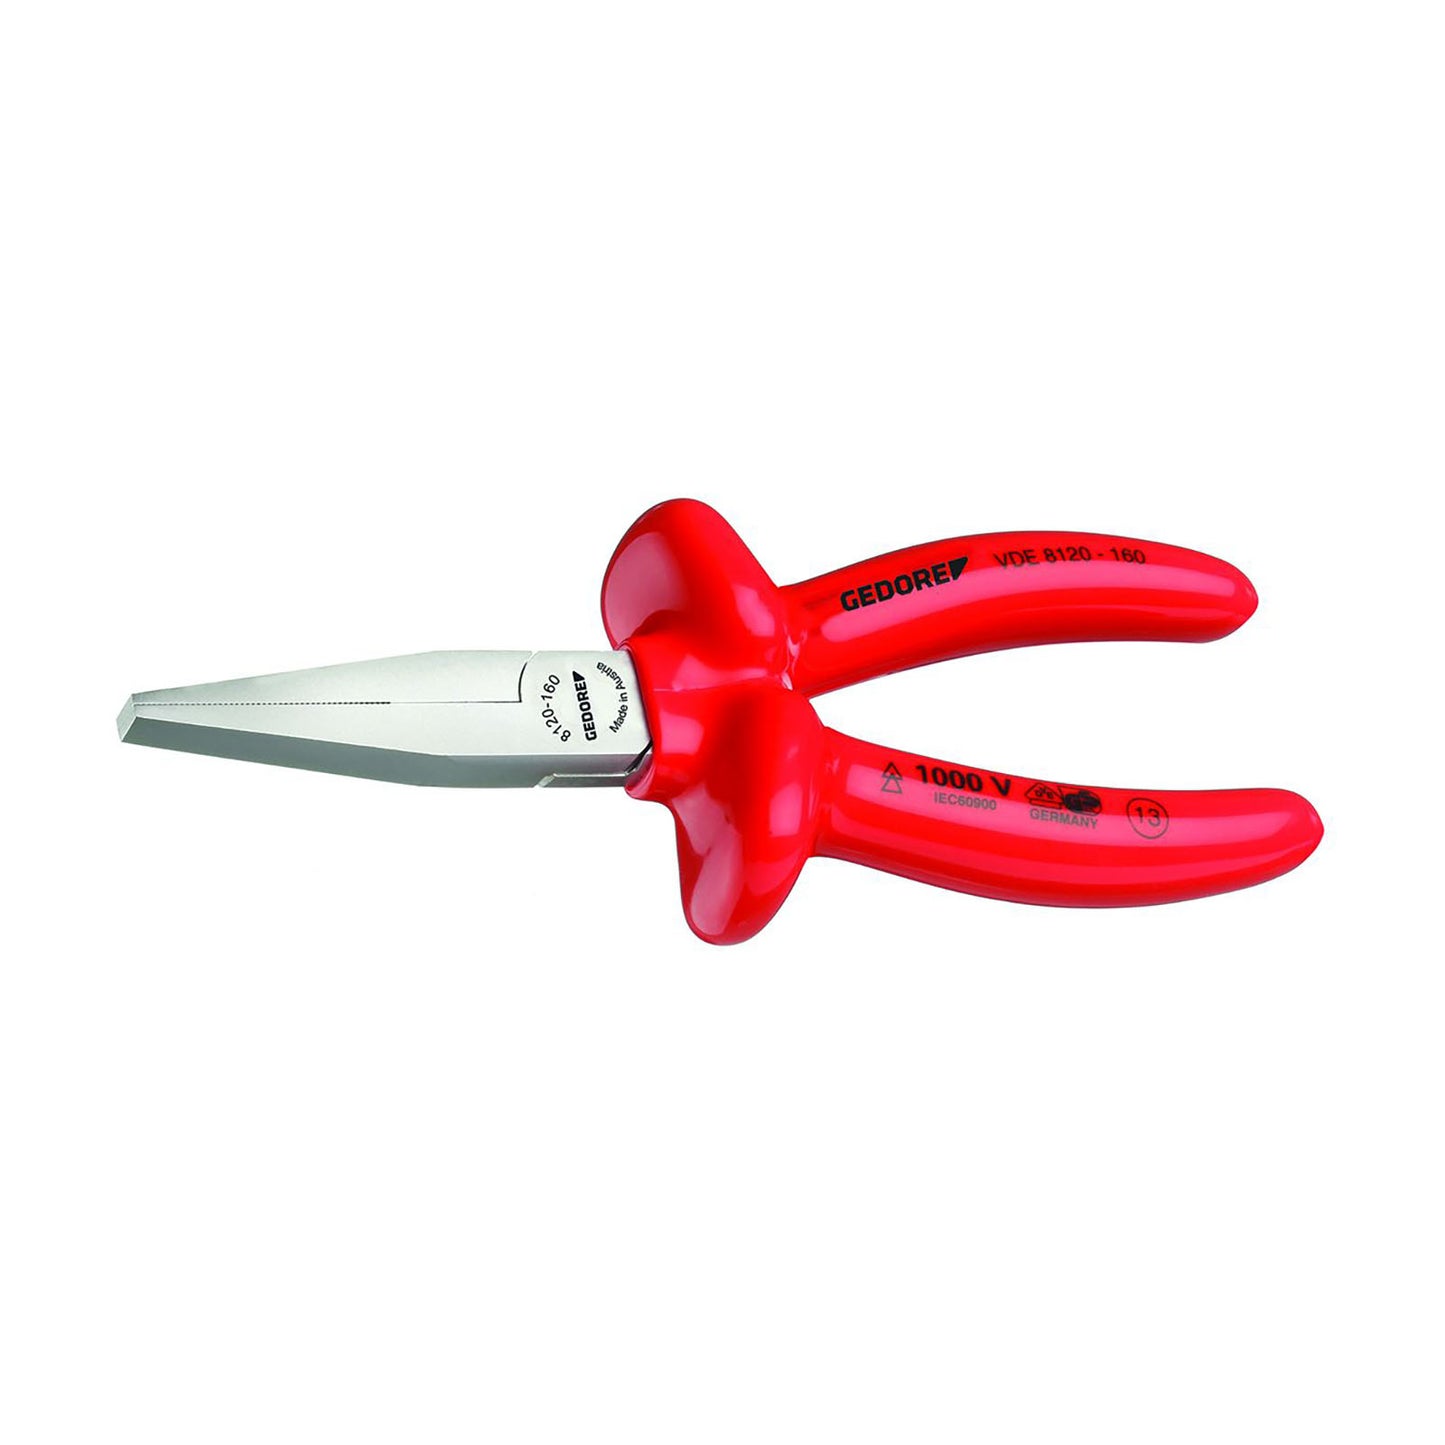 GEDORE VDE 8120-160 - VDE flat mouth pliers 160 (6715330)